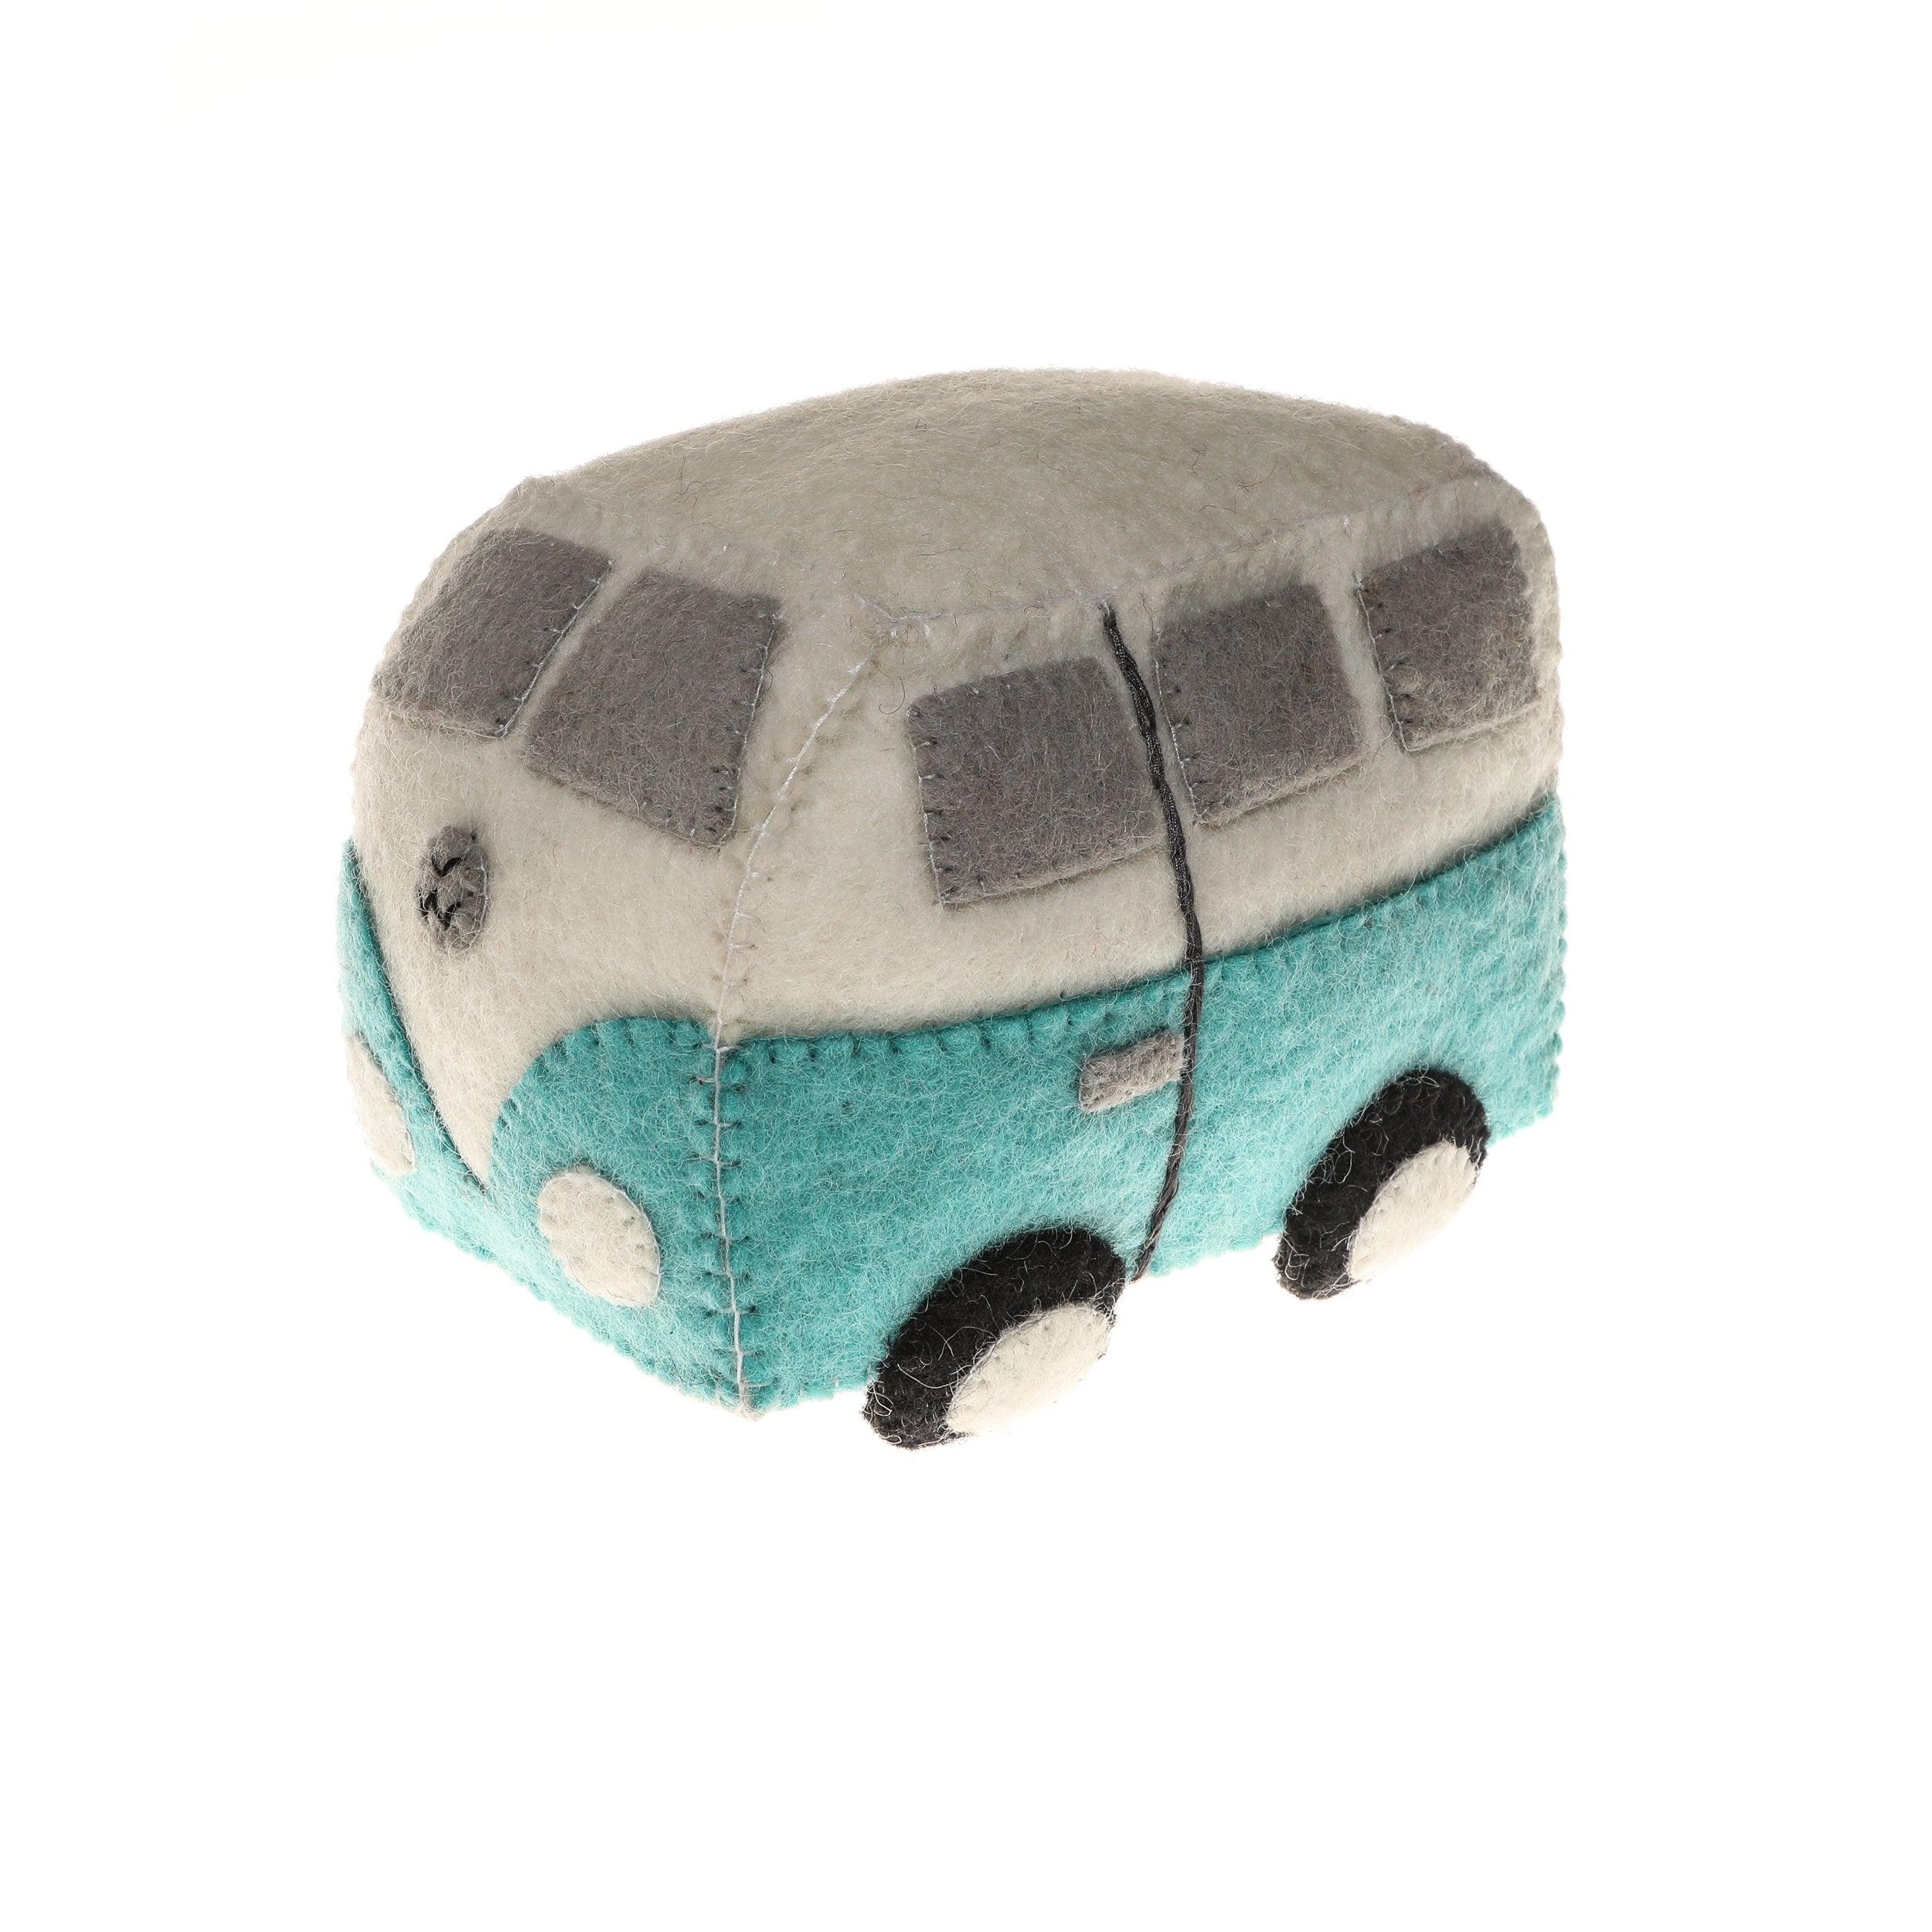 Felt Hippie Van Toy - Why and Whale